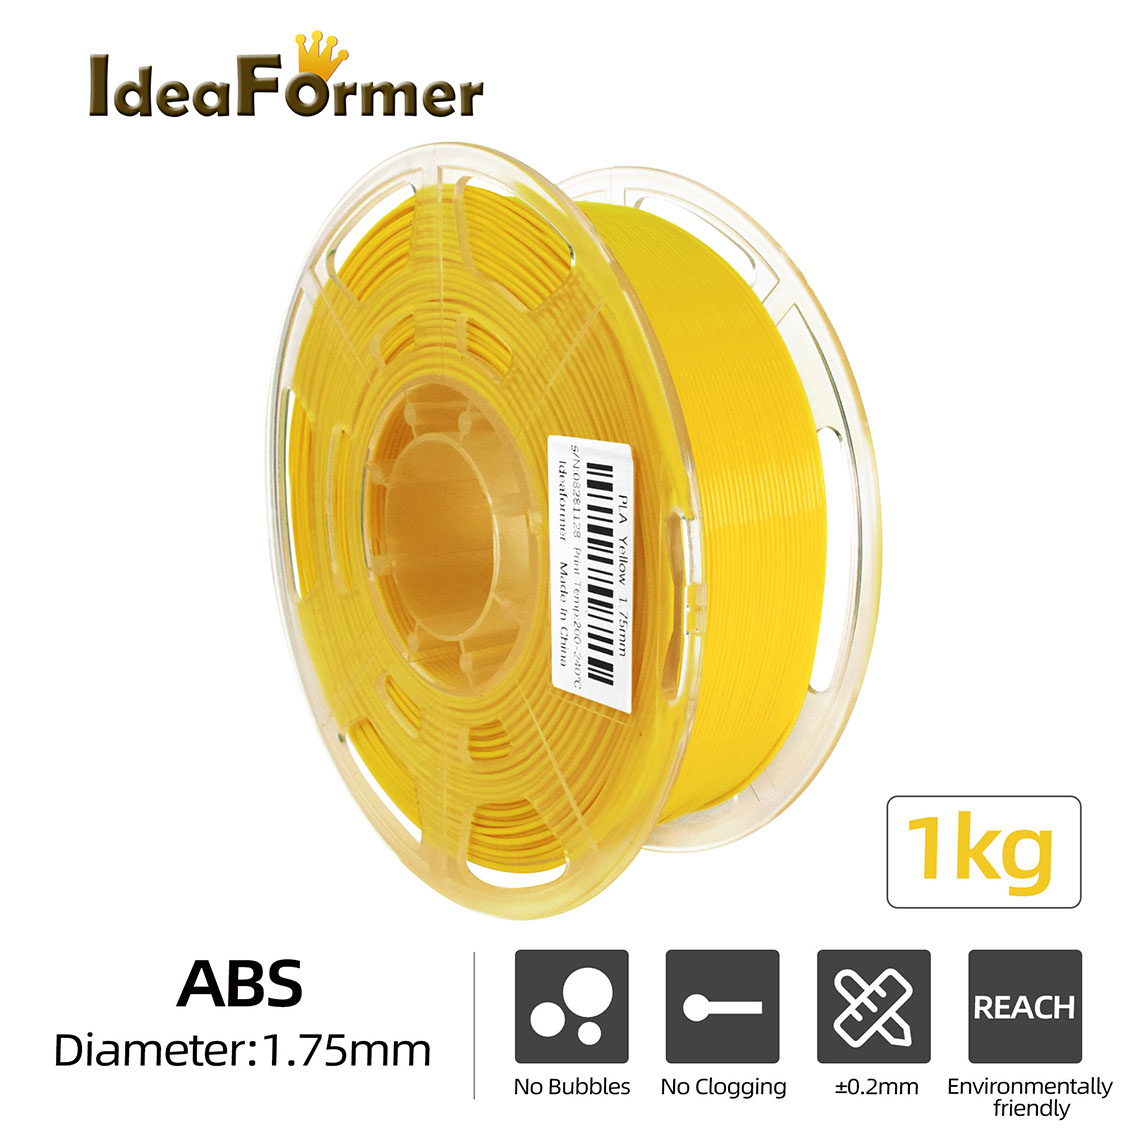 ABS filament 1KG 1.75mm 3D printing consumables quality supplier